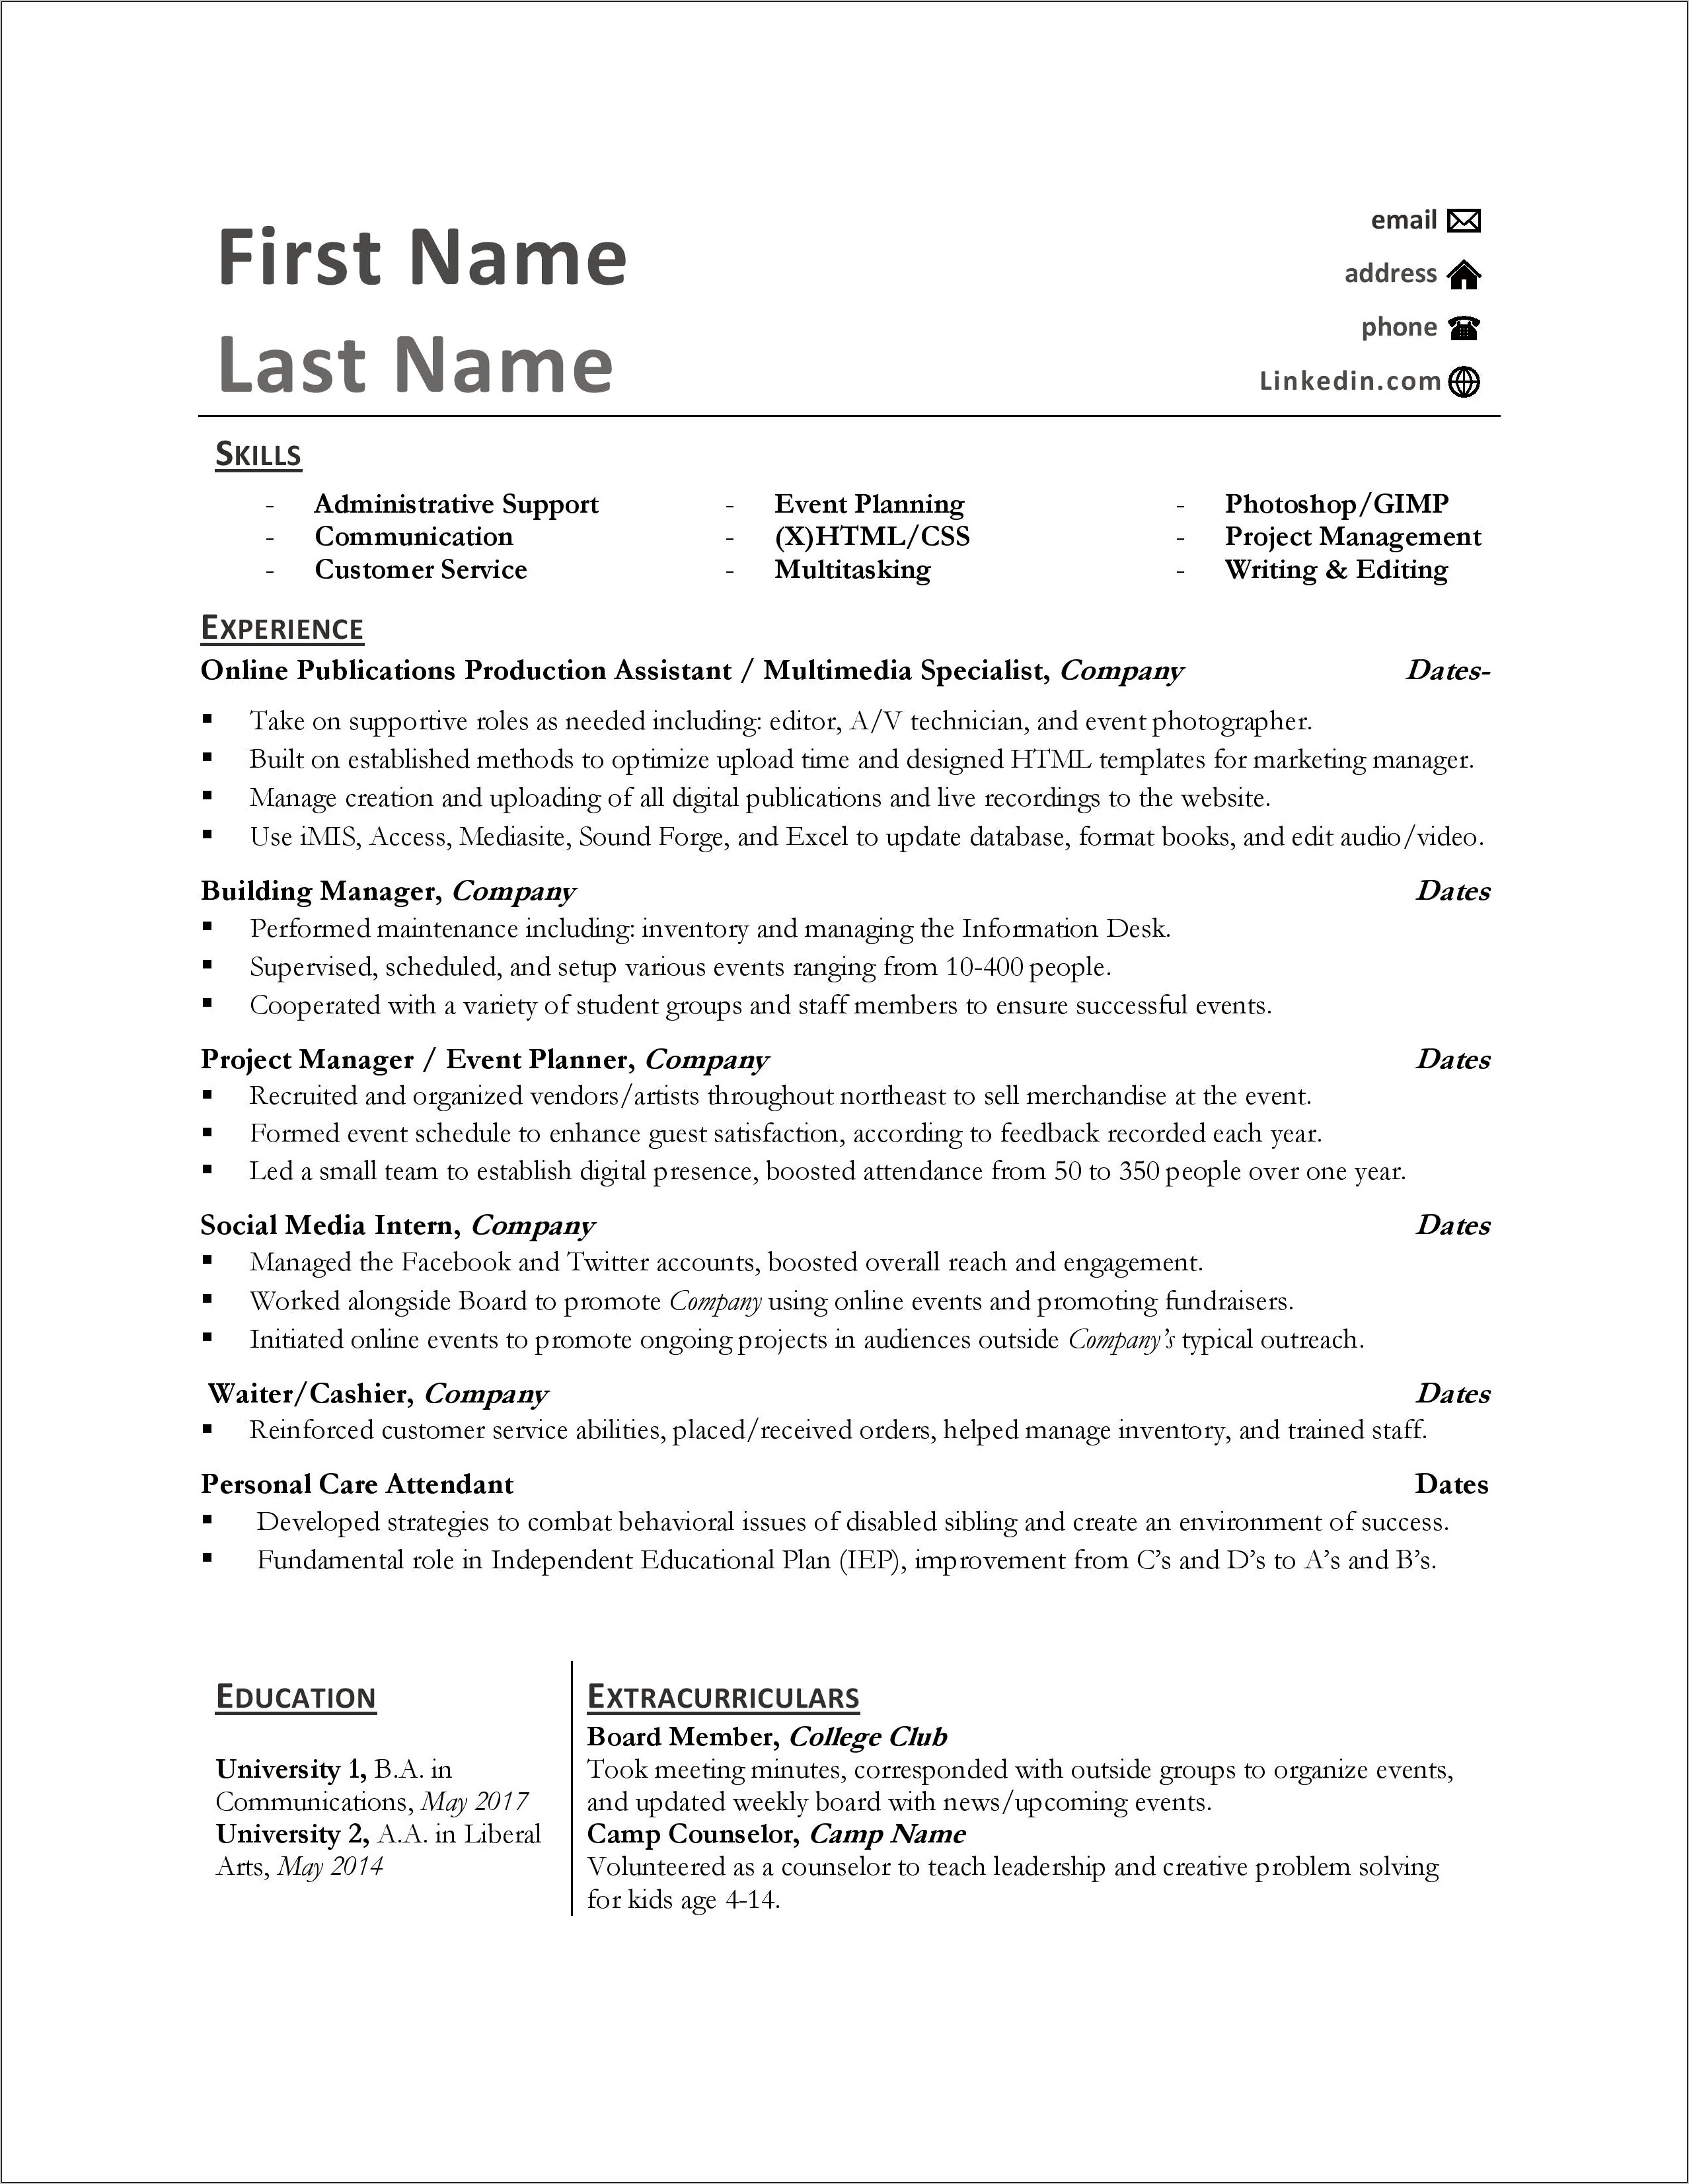 Resume With Different Jobs At The Same Company